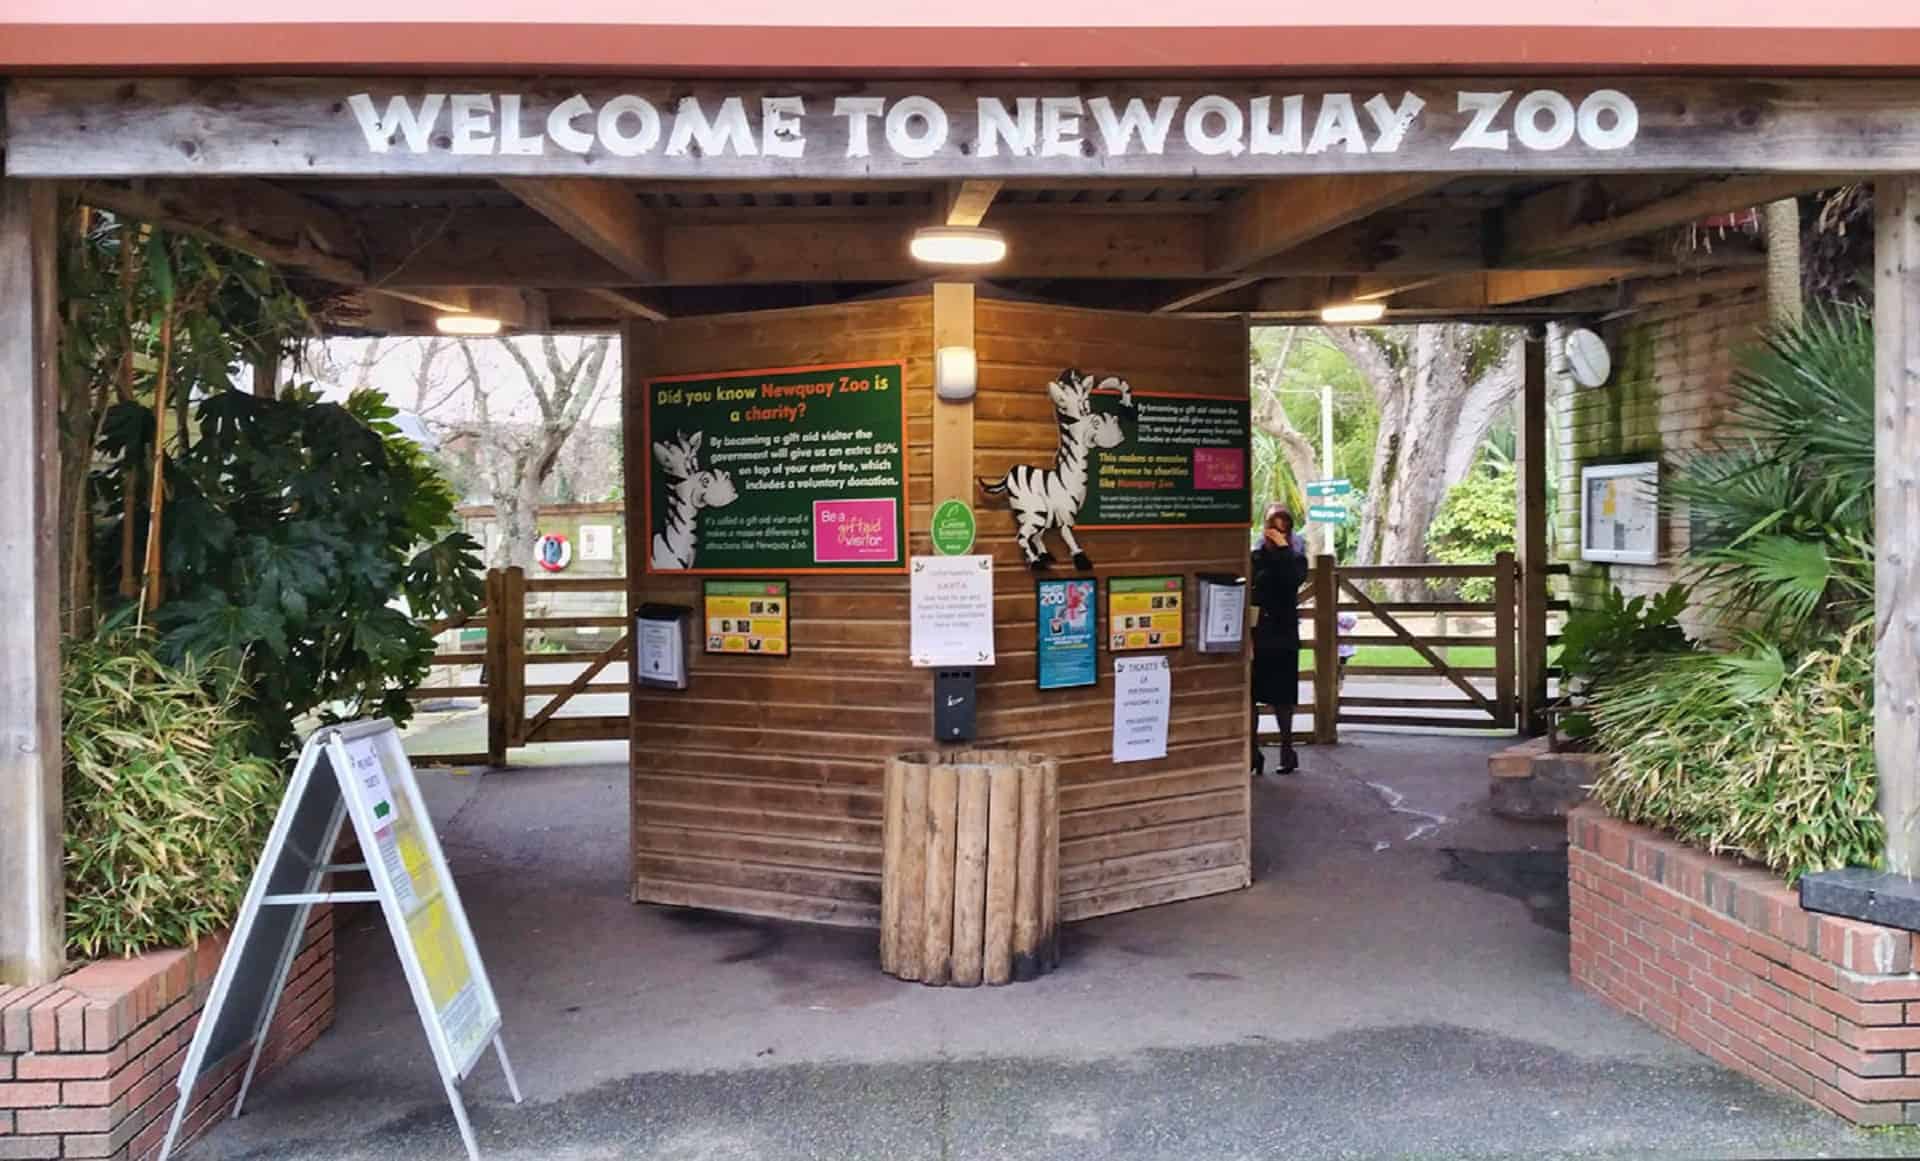 Newquay Zoo in UK